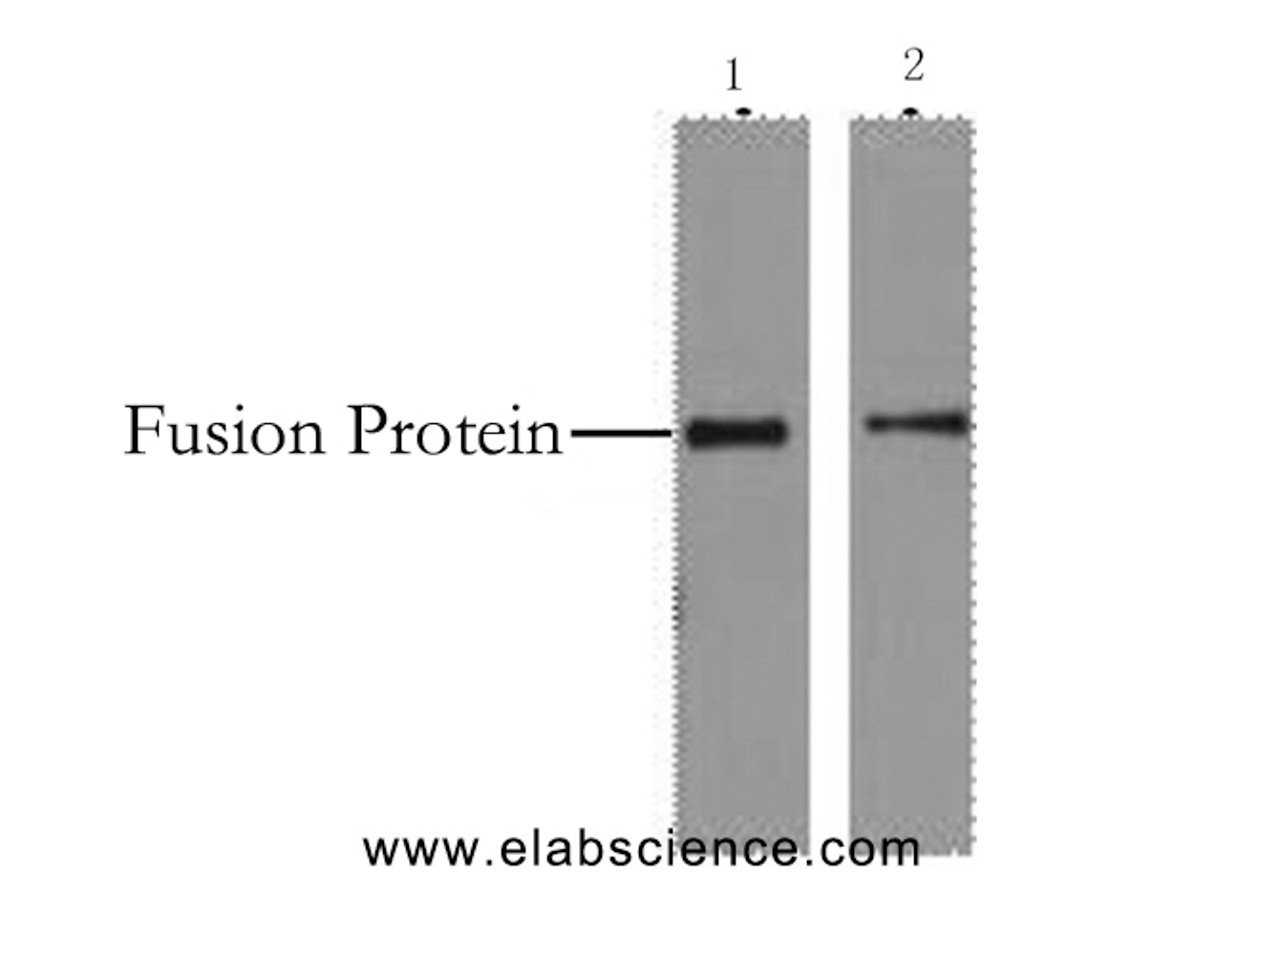 Western Blot analysis of 2ug His fusion protein using His-Tag Monoclonal Antibody at dilution of 1) 1:5000 2) 1:10000.